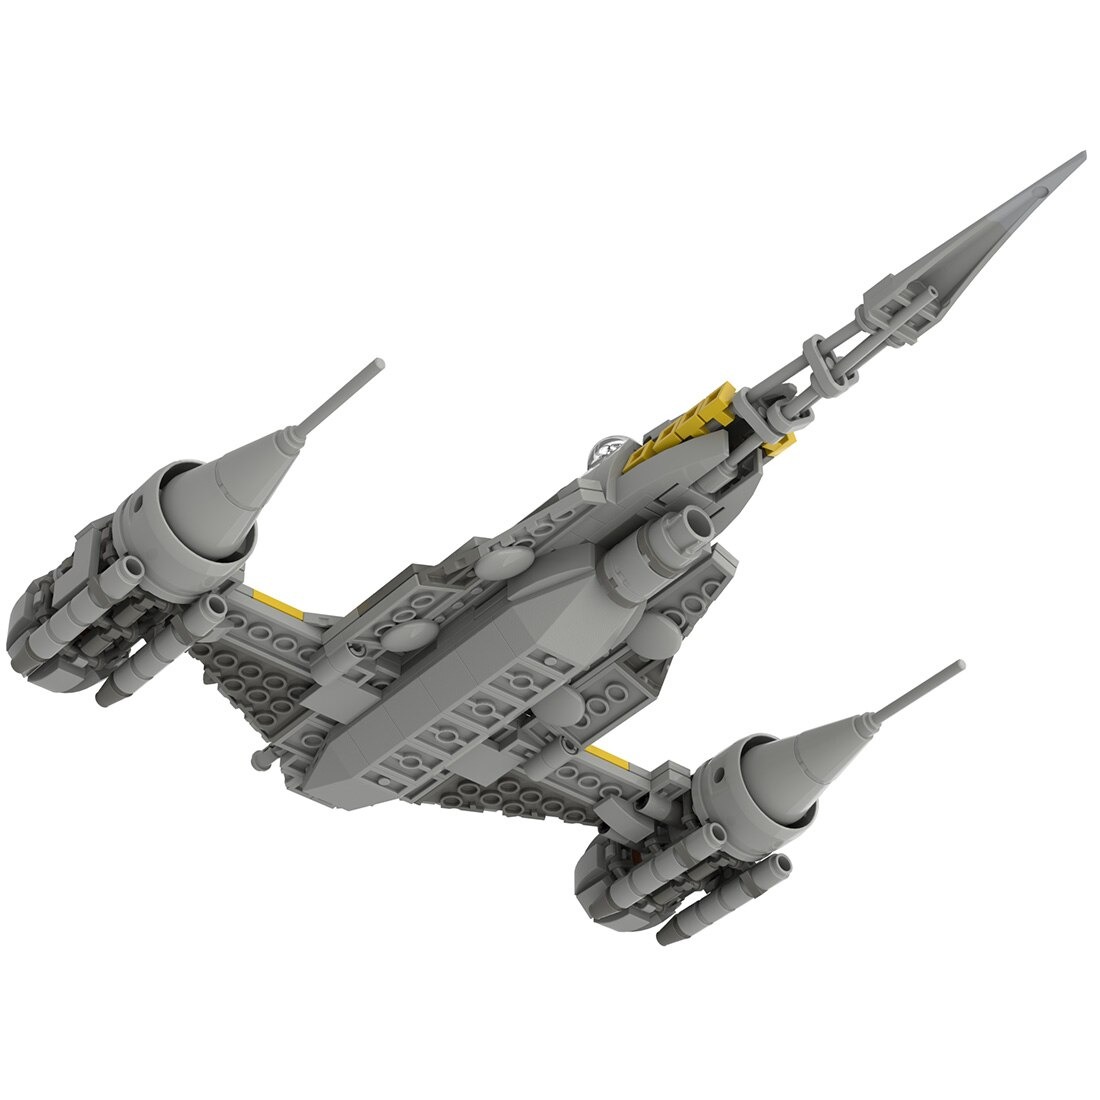 authorized moc 100546 n 1 starfighter bui main 3 1